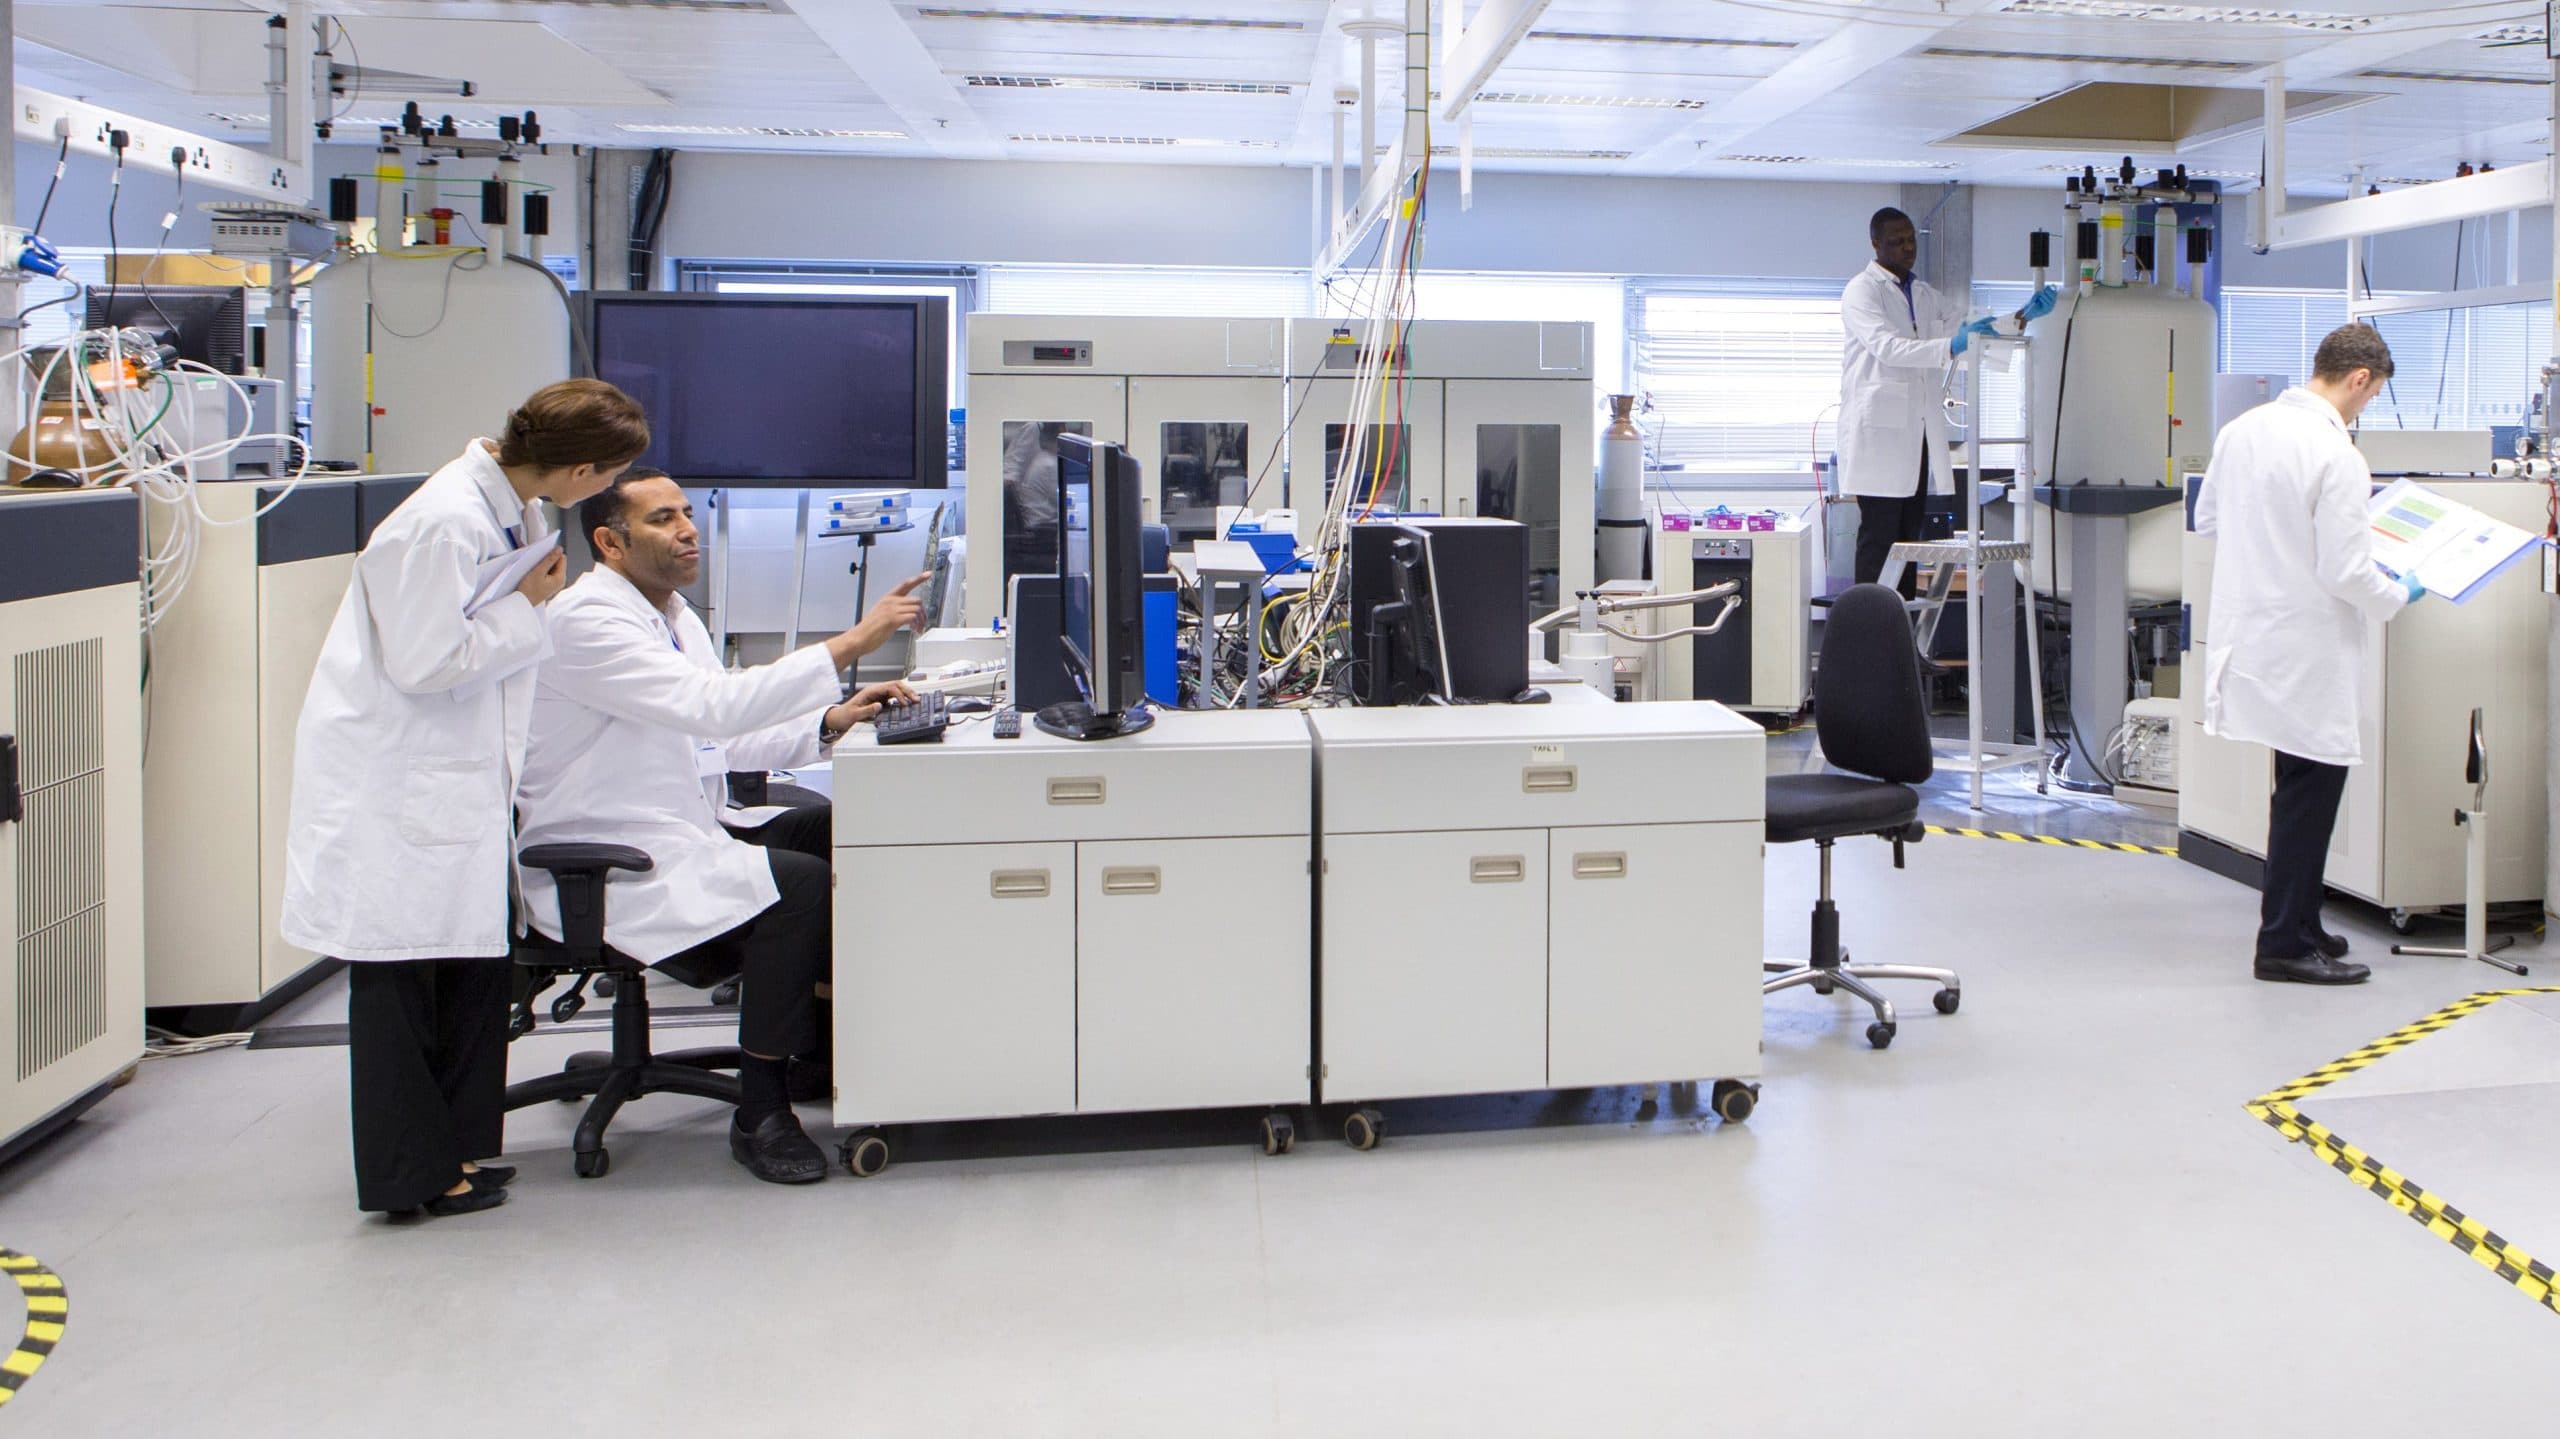 Scientists wearing white coats working in an open plan laboratory designed for optimal laboratory indoor air quality.